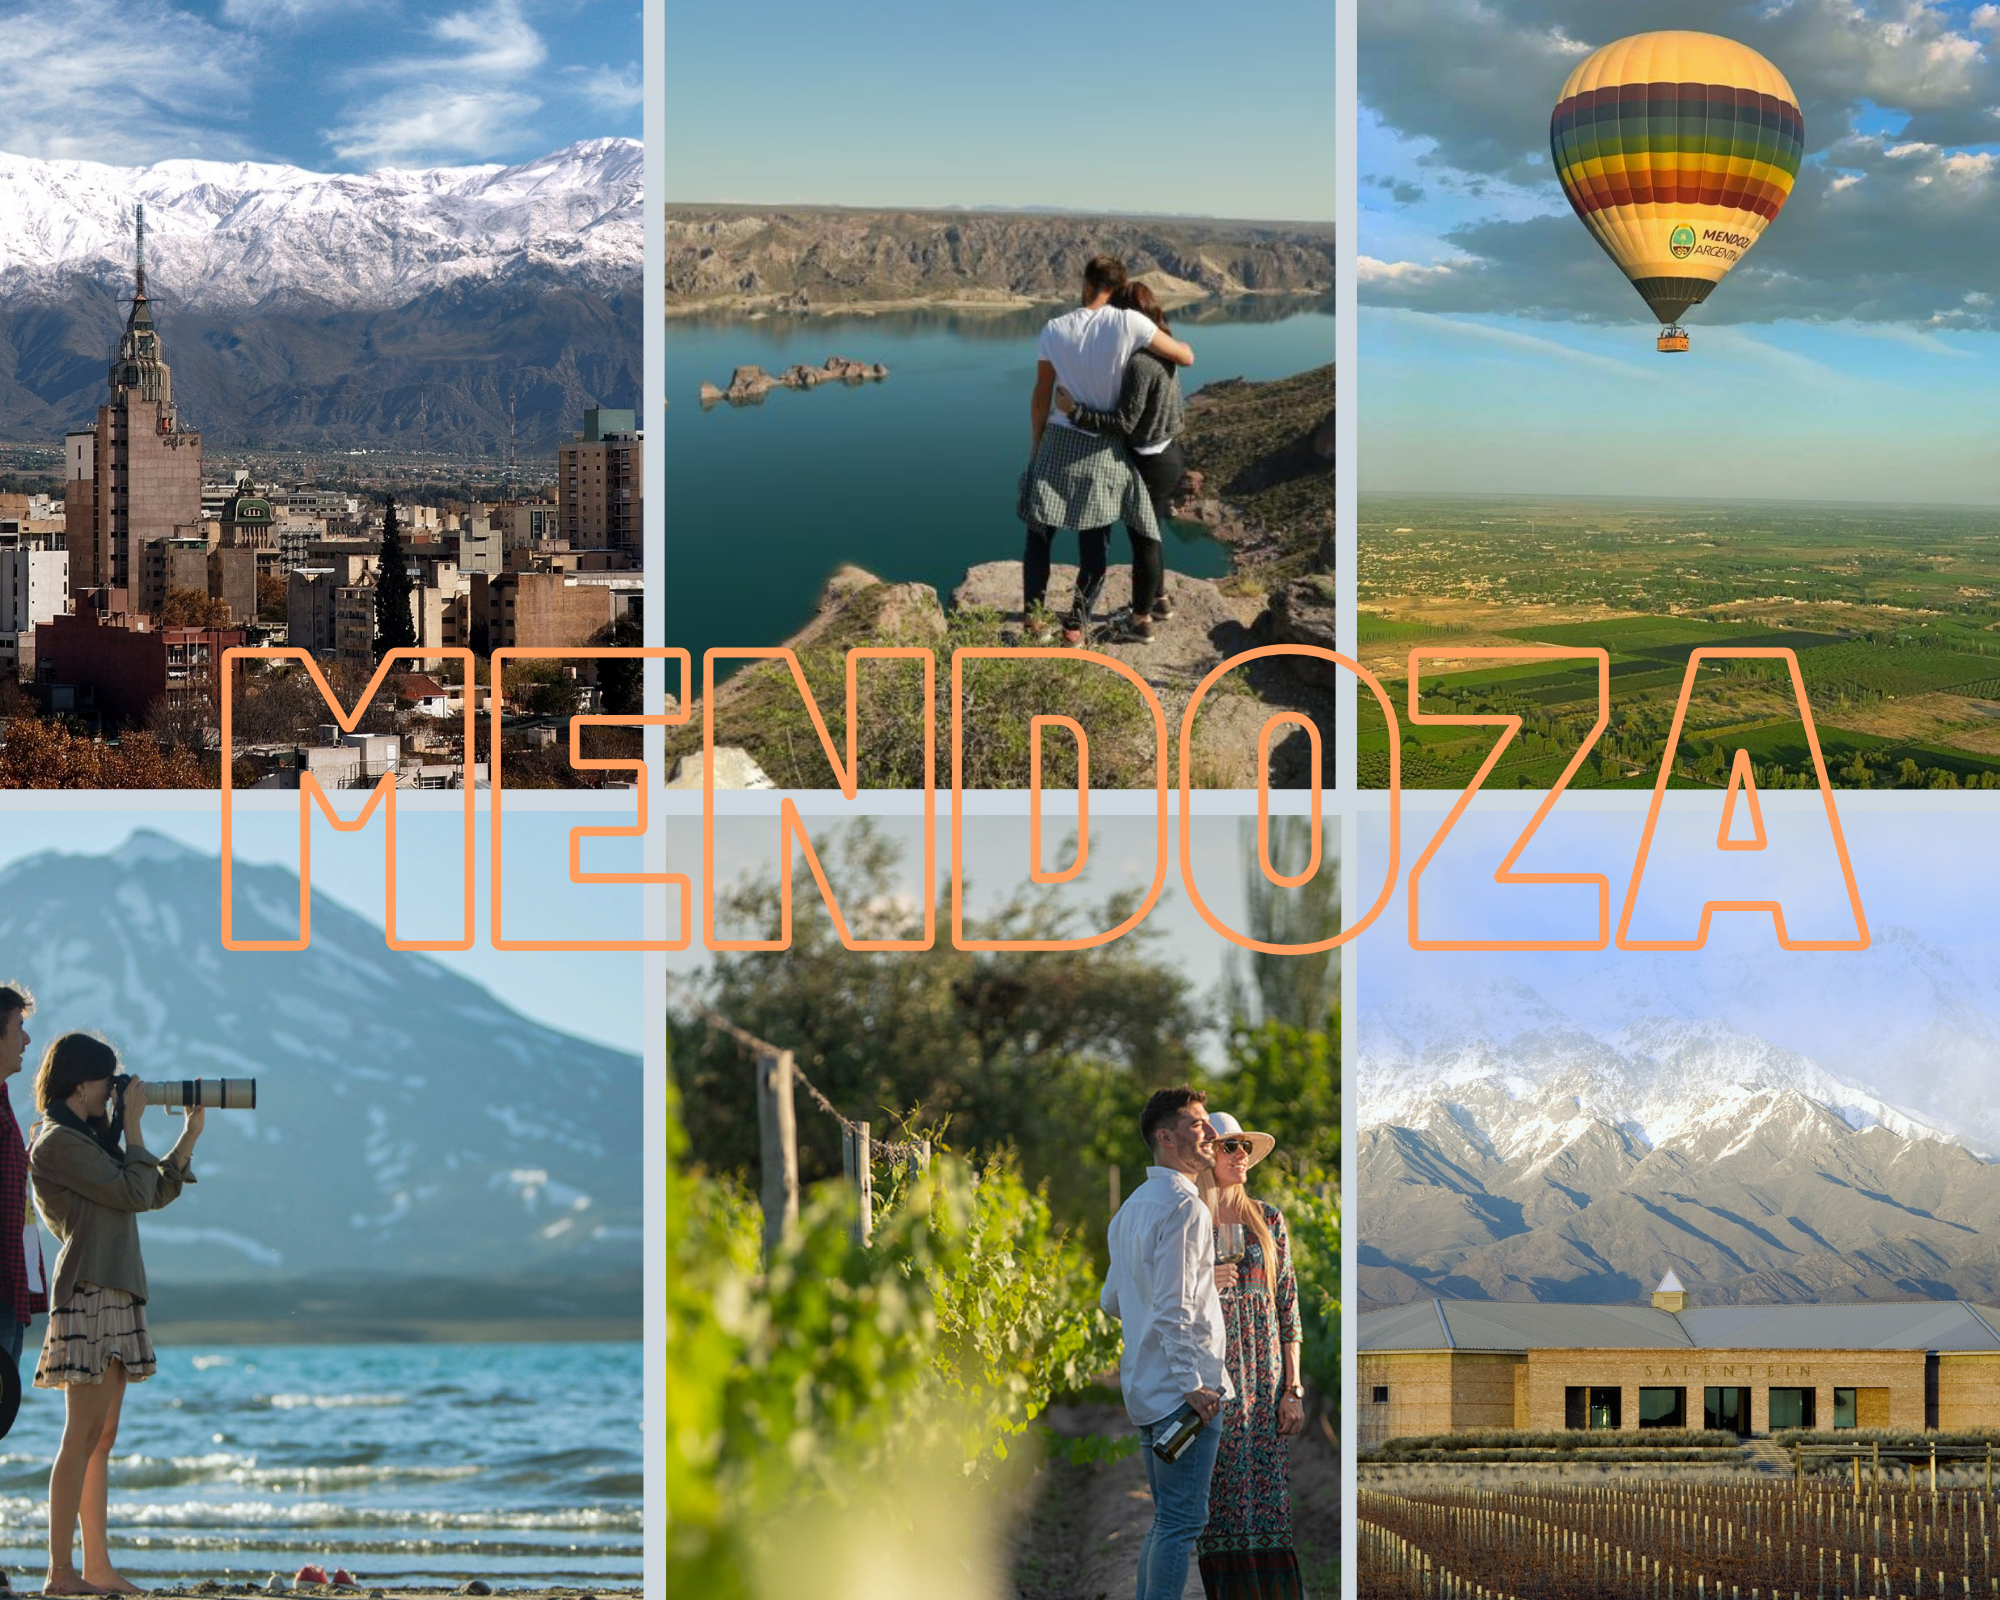 MENDOZA, A LAND FOR AMAZEMENT